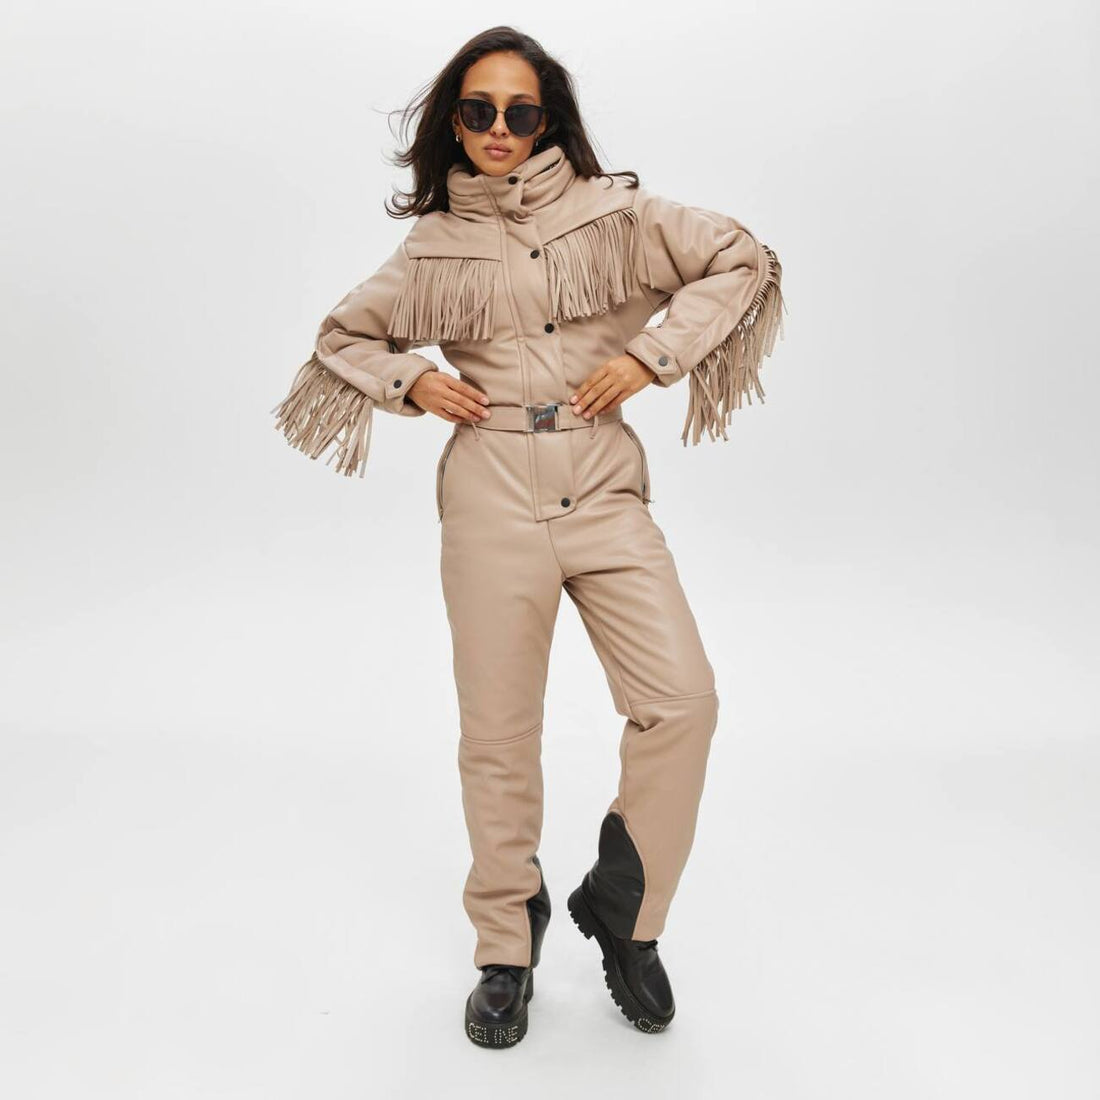 Cowgirl winter outfit snowsuit - BONA - CAPPUCCINO - Ski clothing full body suit female